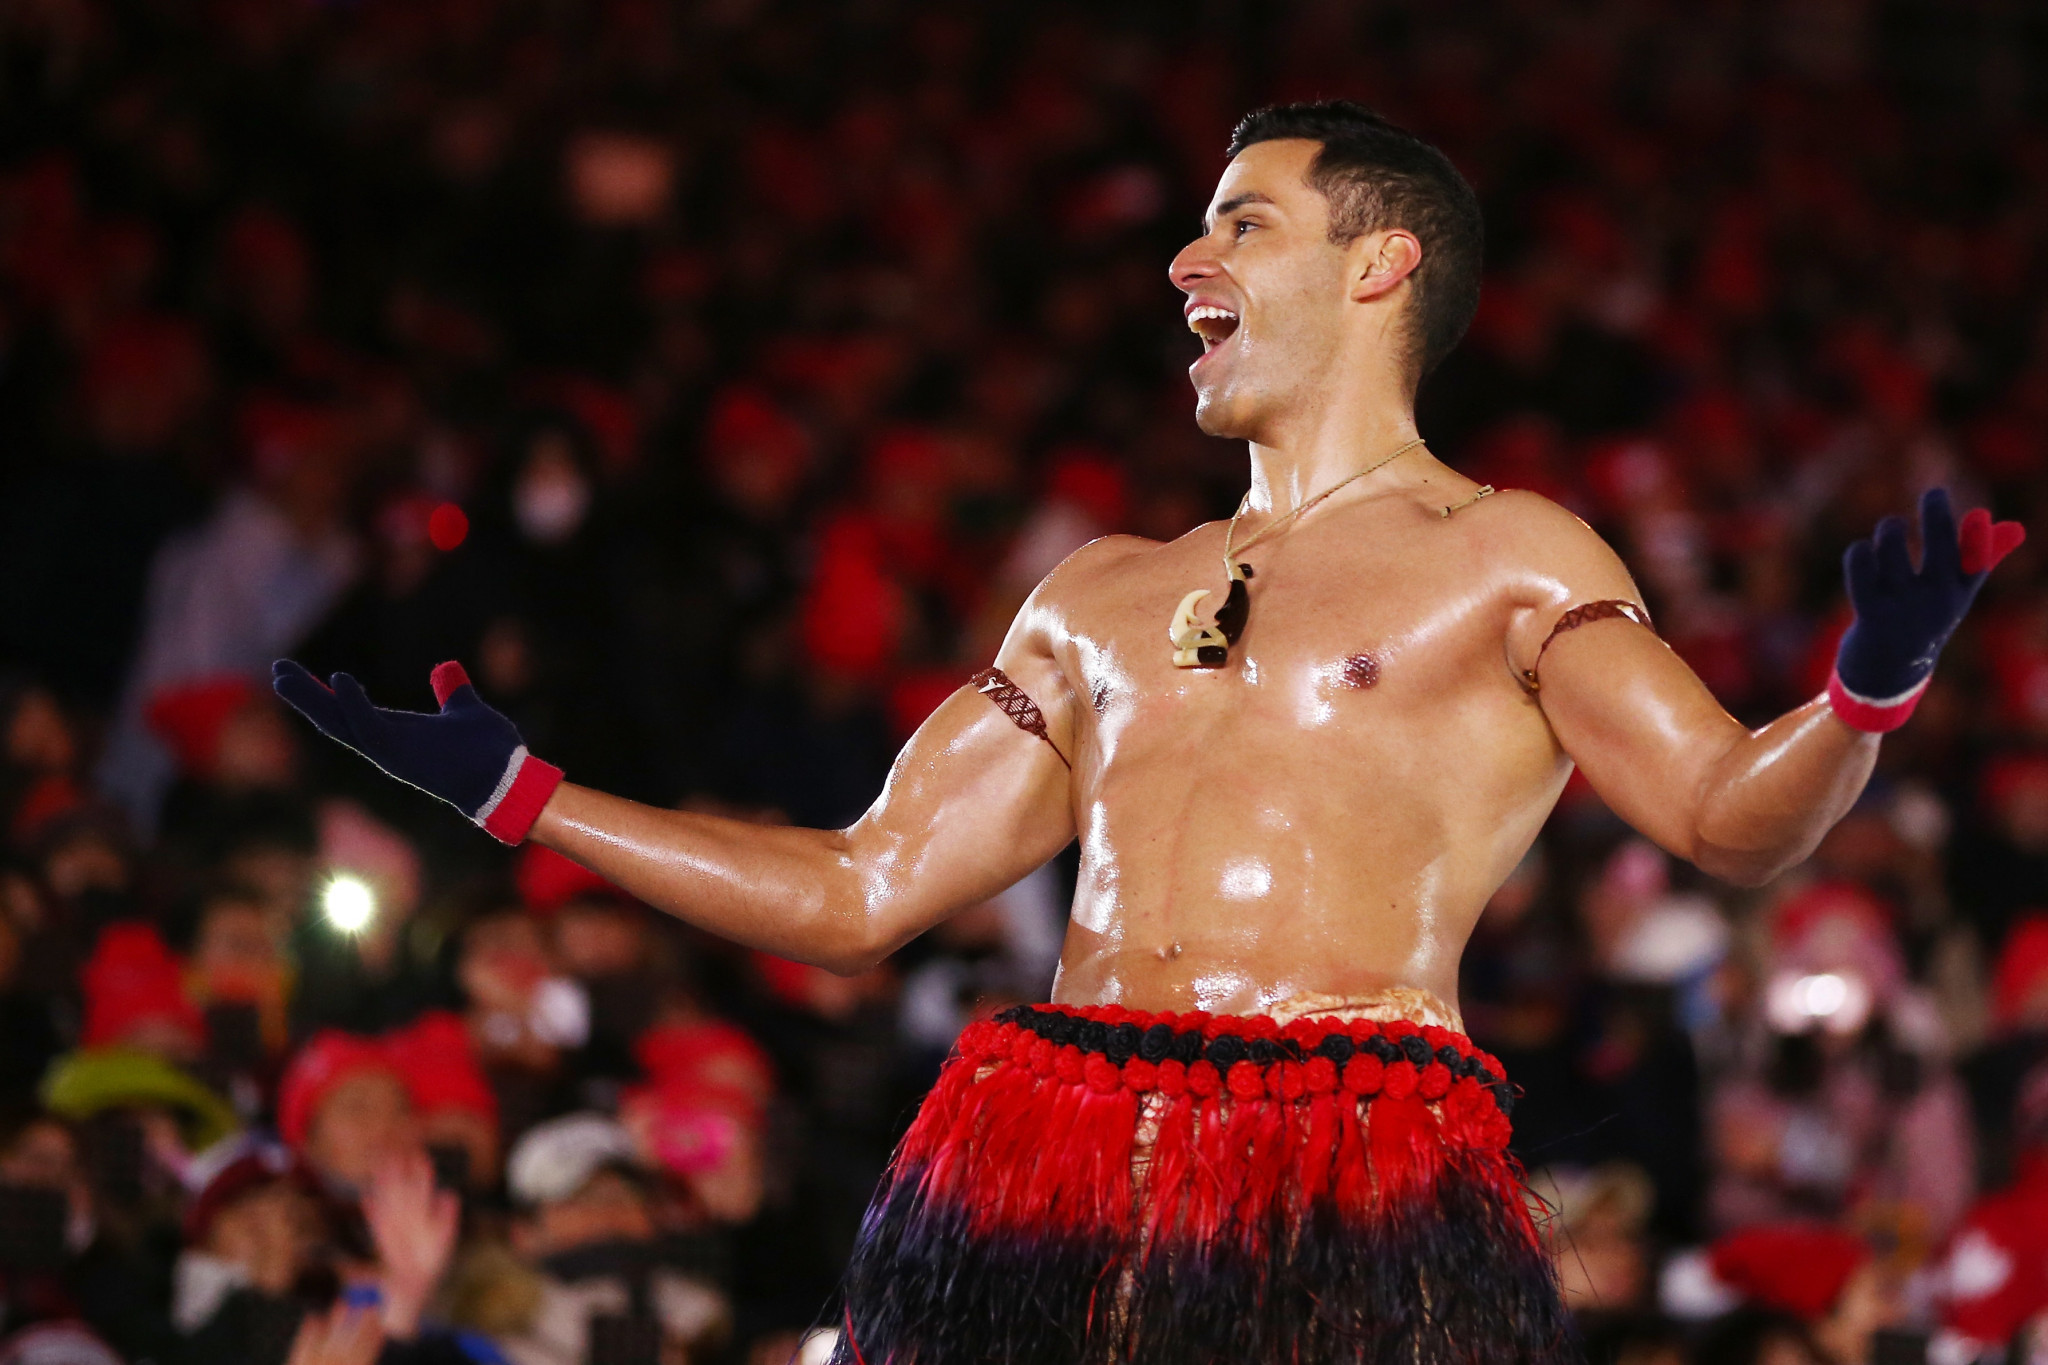 Tonga's Pita Taufatofua will try to take part in his third Olympic sport at the Tokyo 2020 Games ©Getty Images